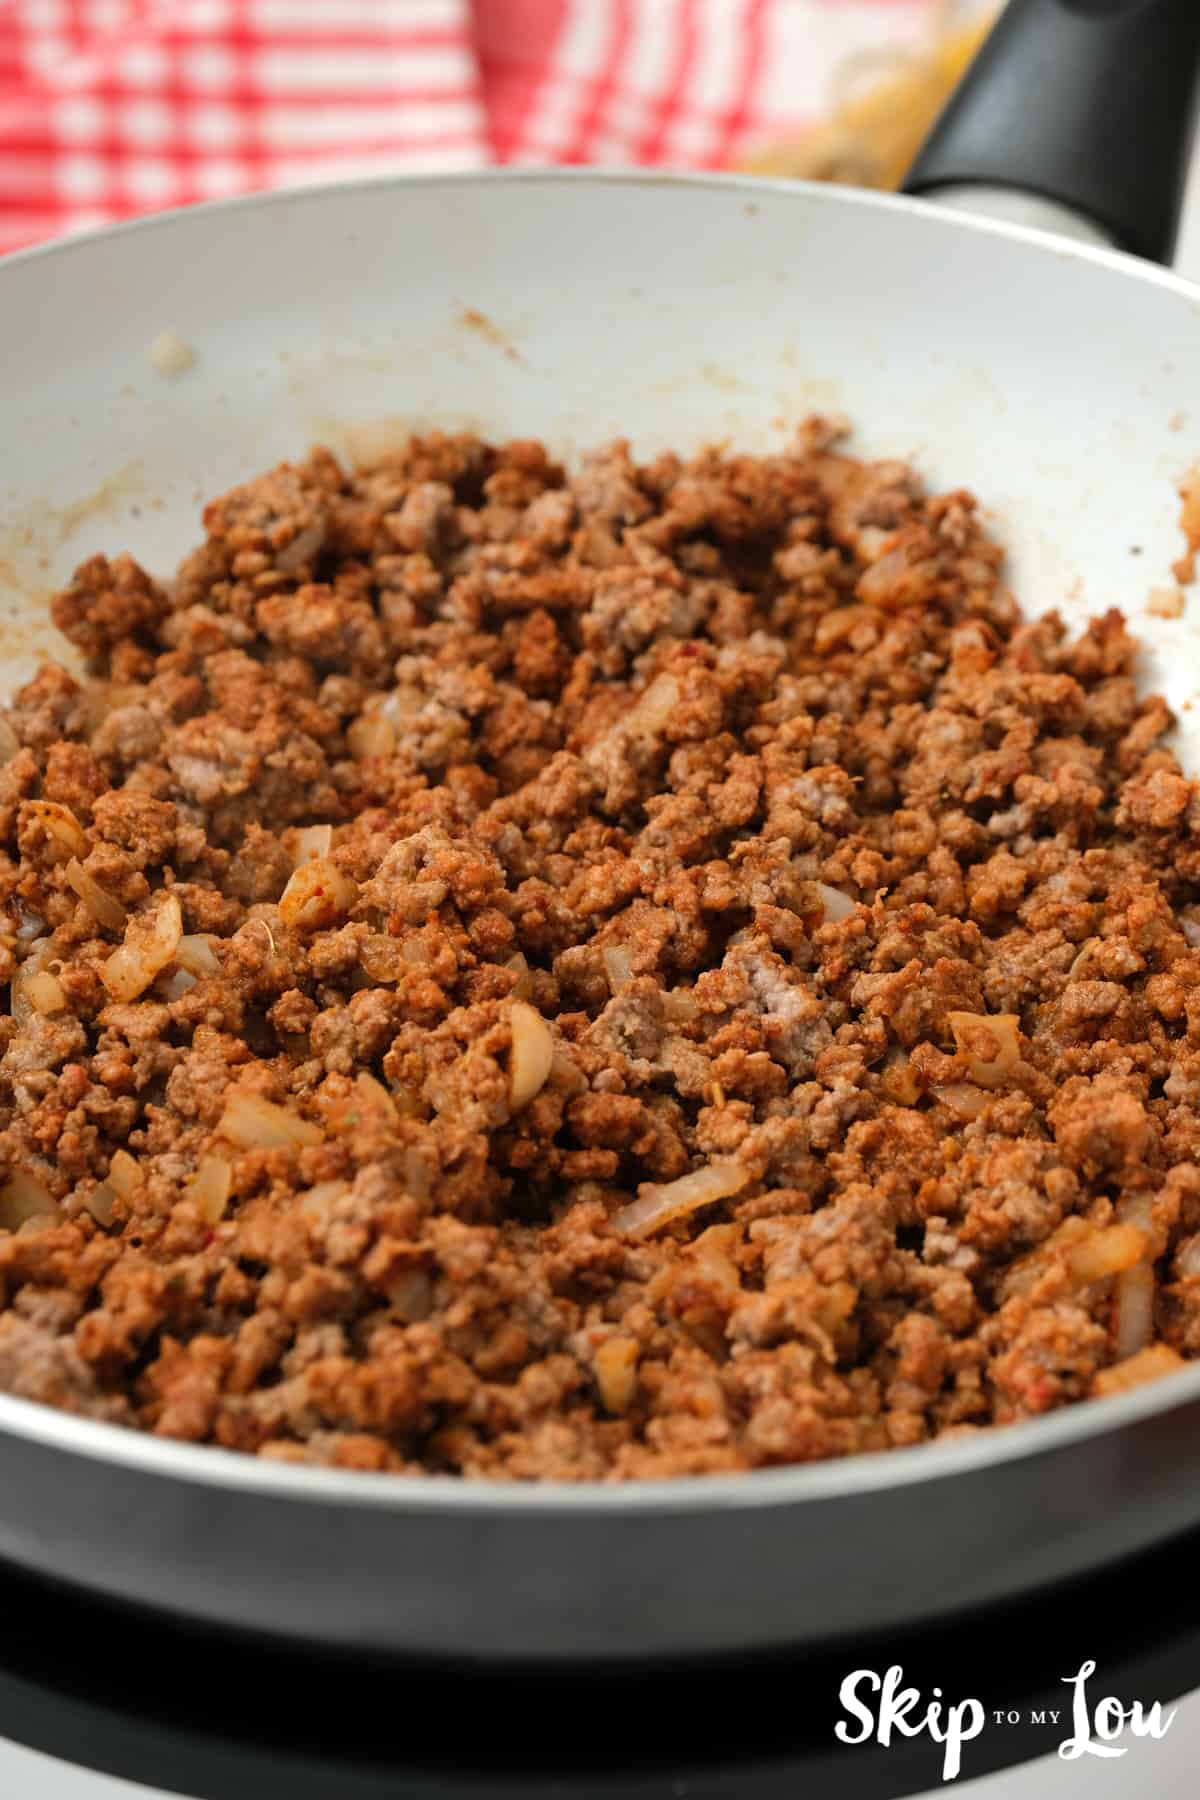 Taco seasoning stirred into the meat.